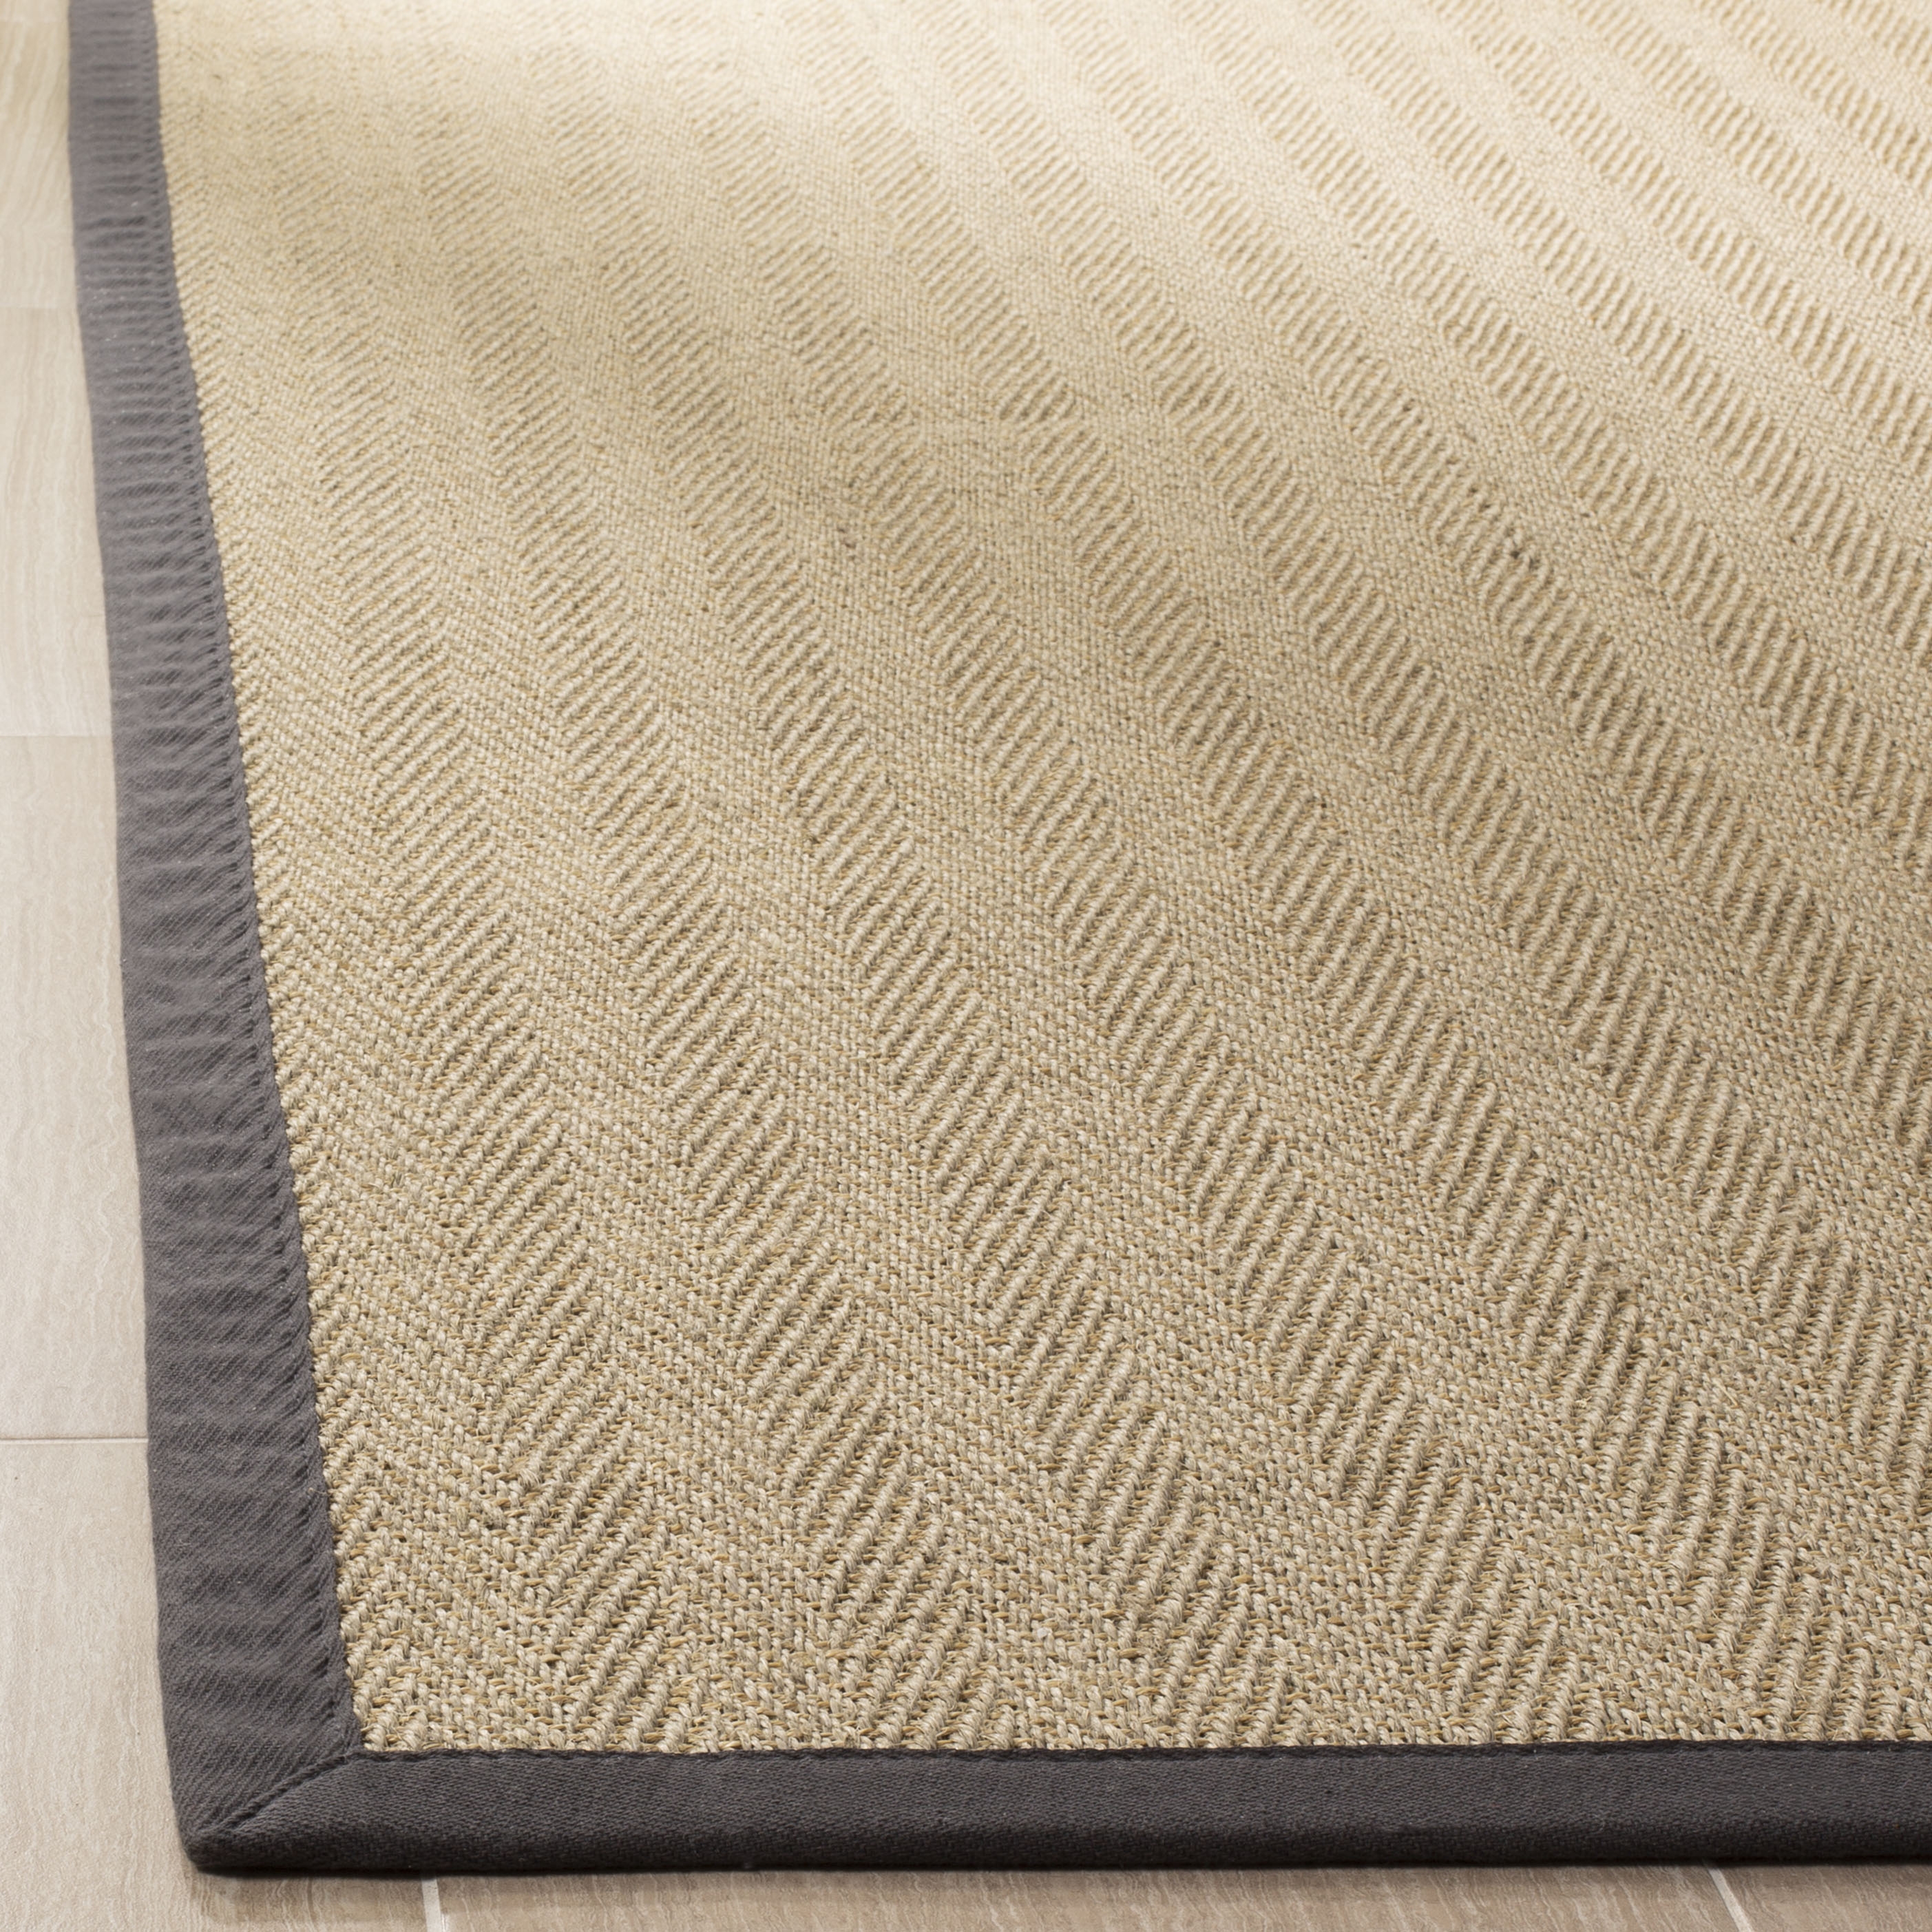 Arlo Home Woven Area Rug, NF134A, Natural/Grey,  4' X 6' - Image 2